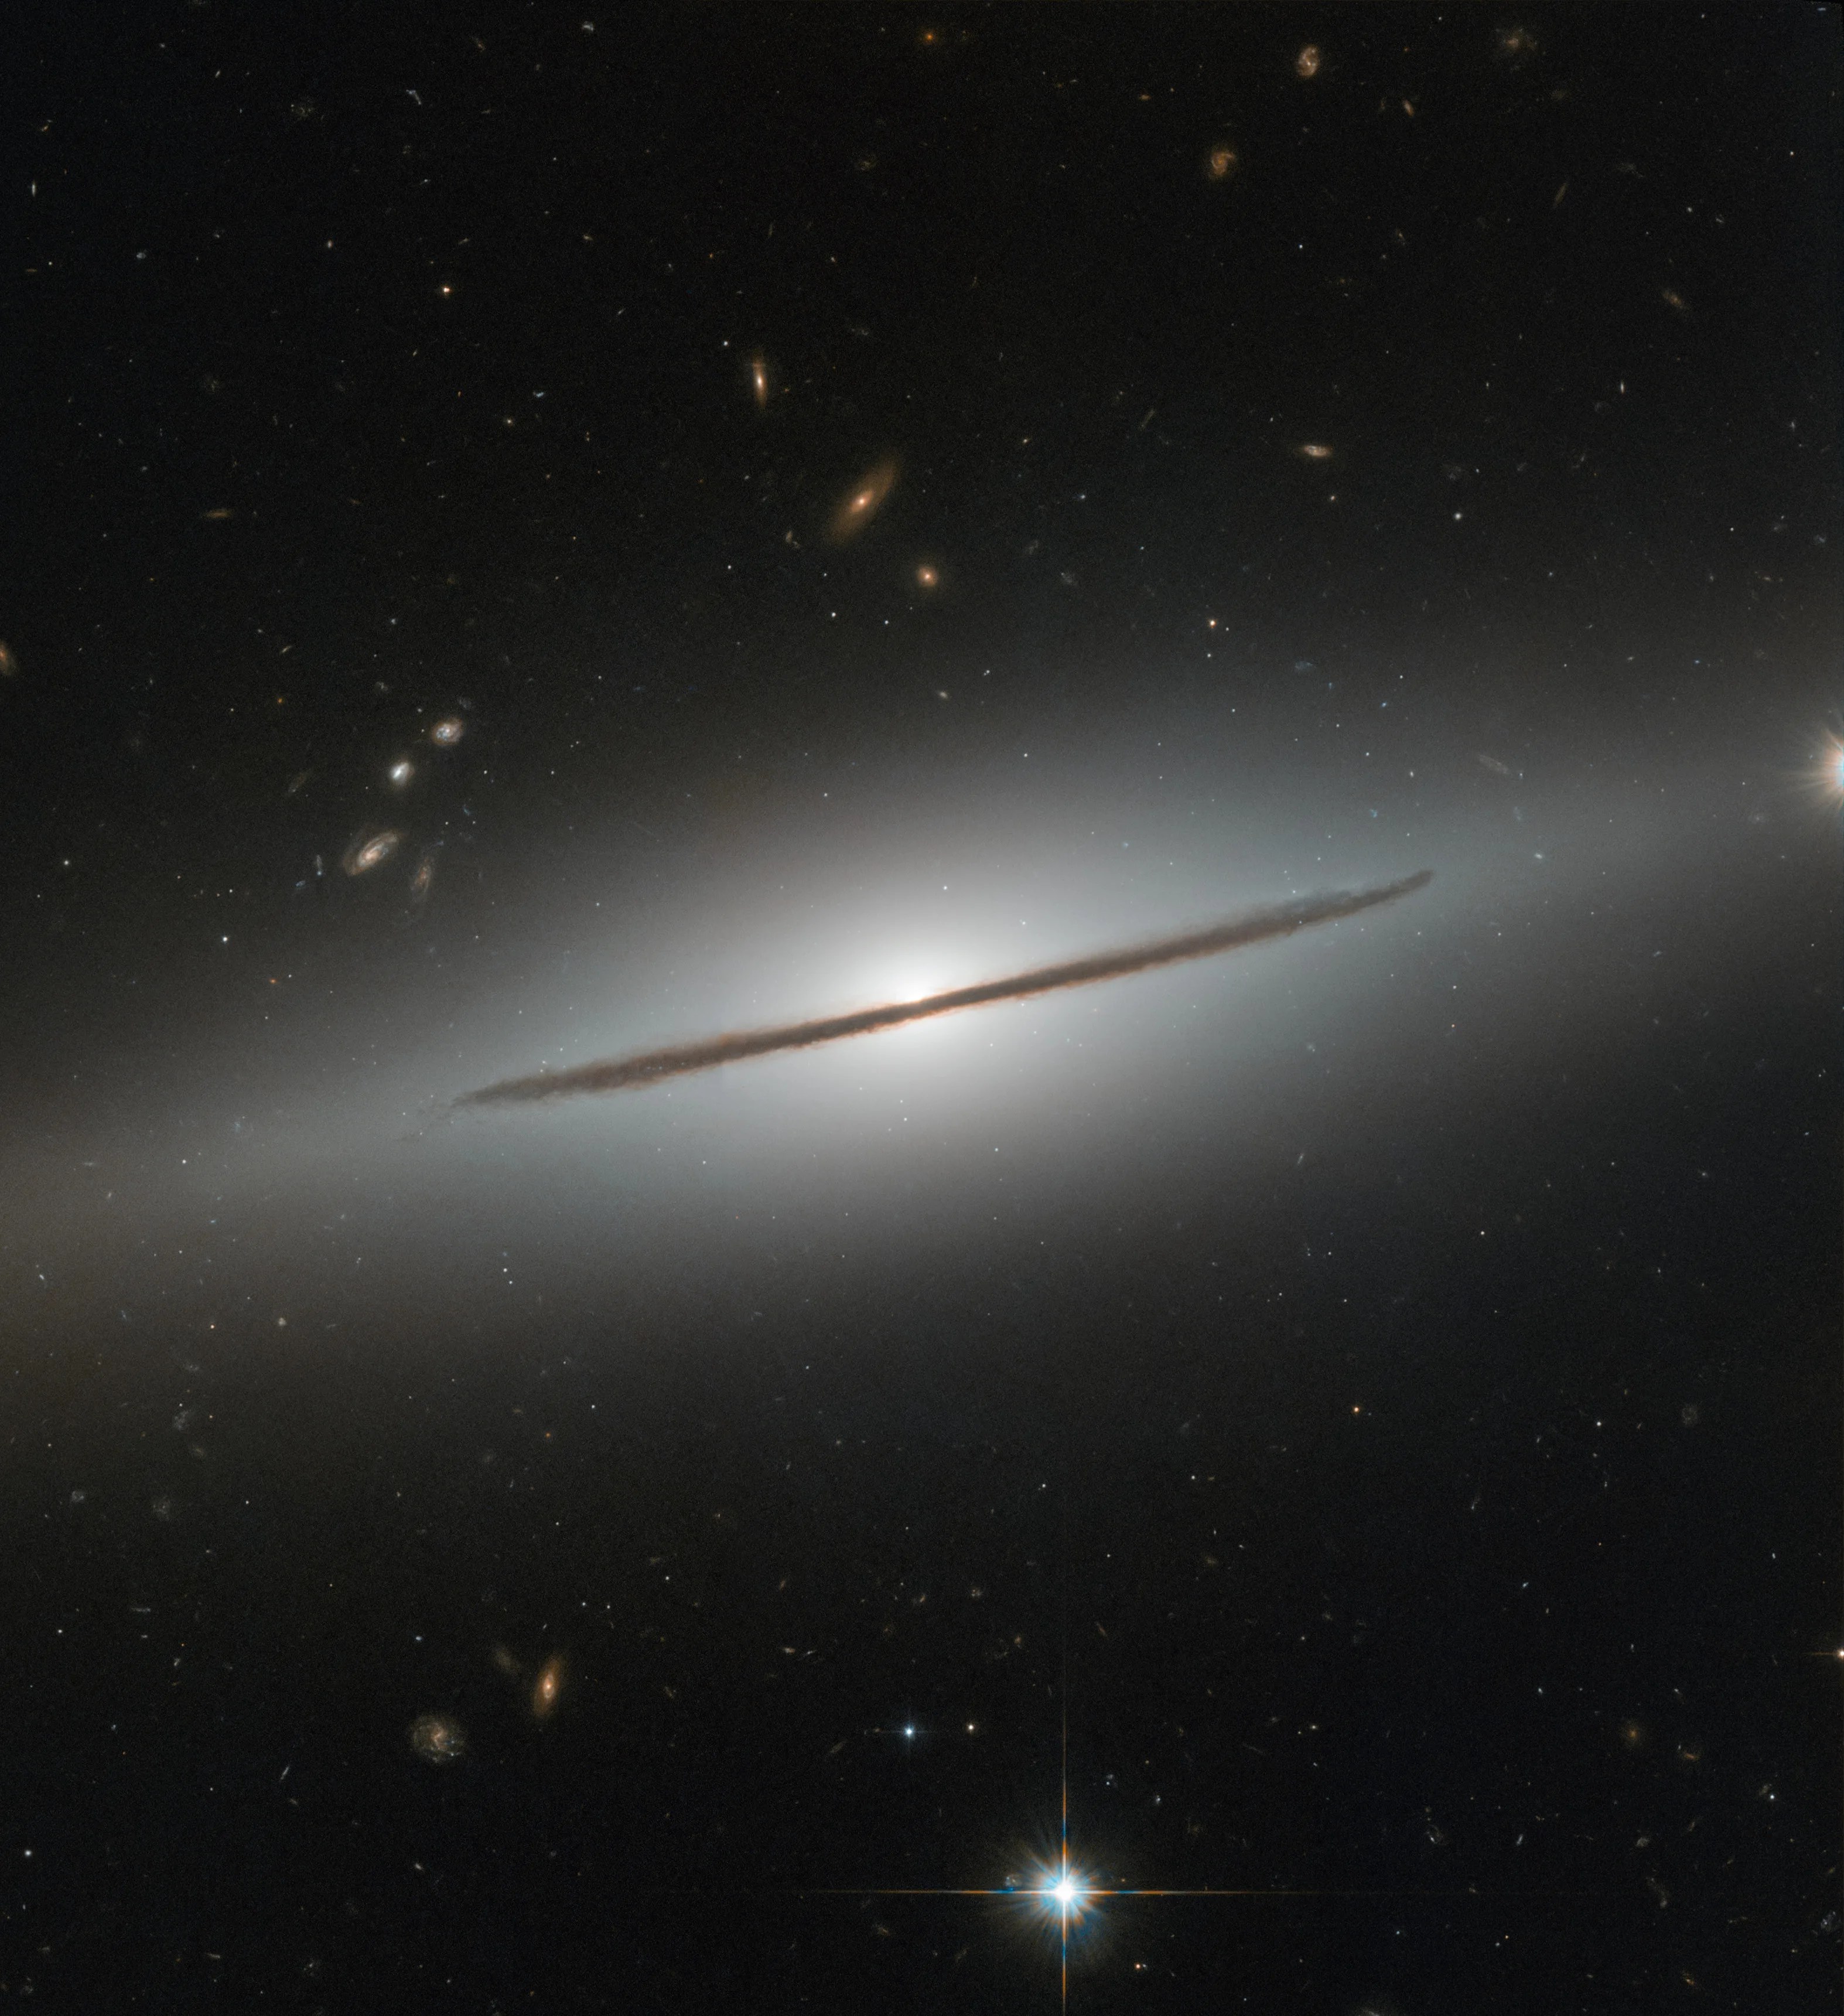 Bright white galaxy with a black bar along the centerline